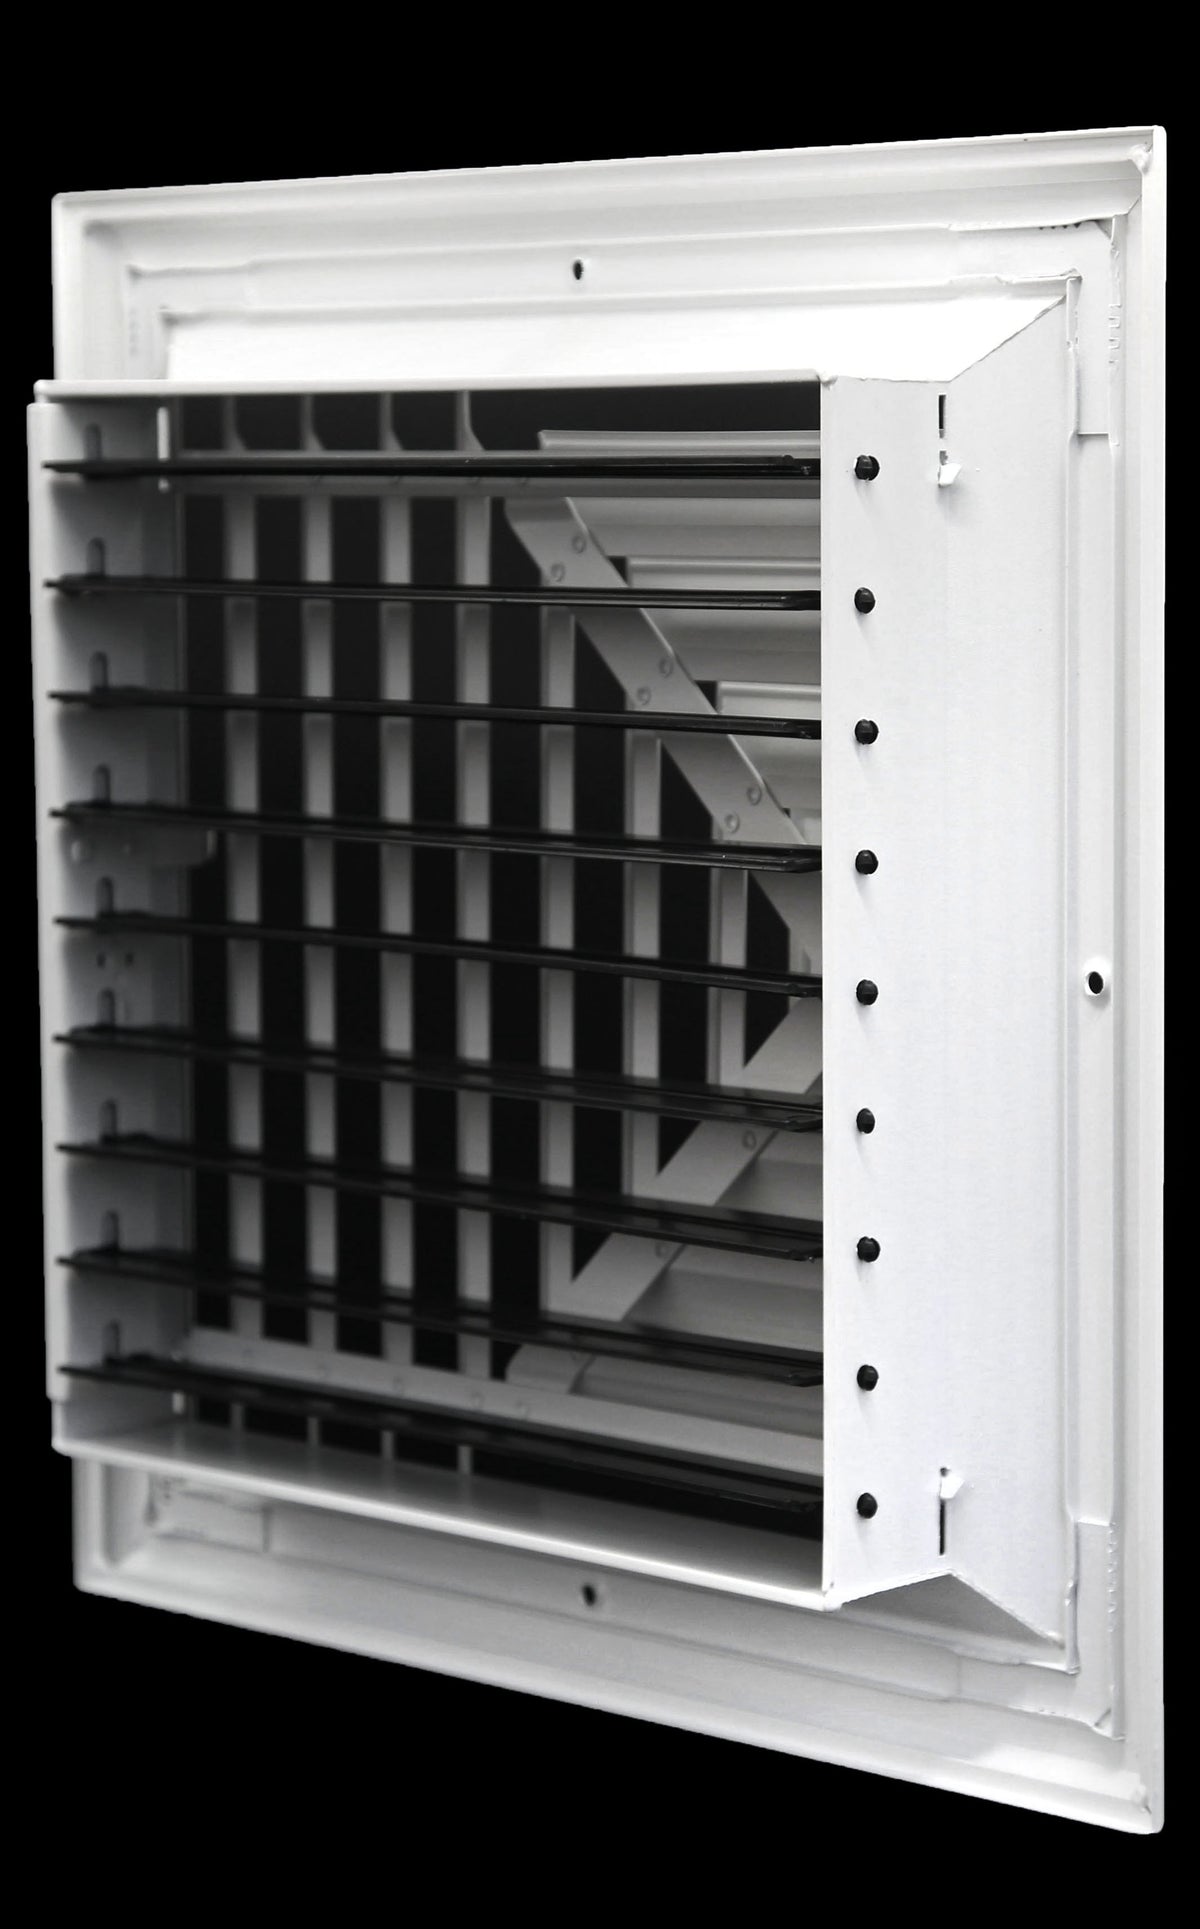 12&quot; x 12&quot; 4-WAY SUPPLY GRILLE - DUCT COVER &amp; DIFFUSER - LOW NOISE - For Ceiling - With Opposing Damper Blades